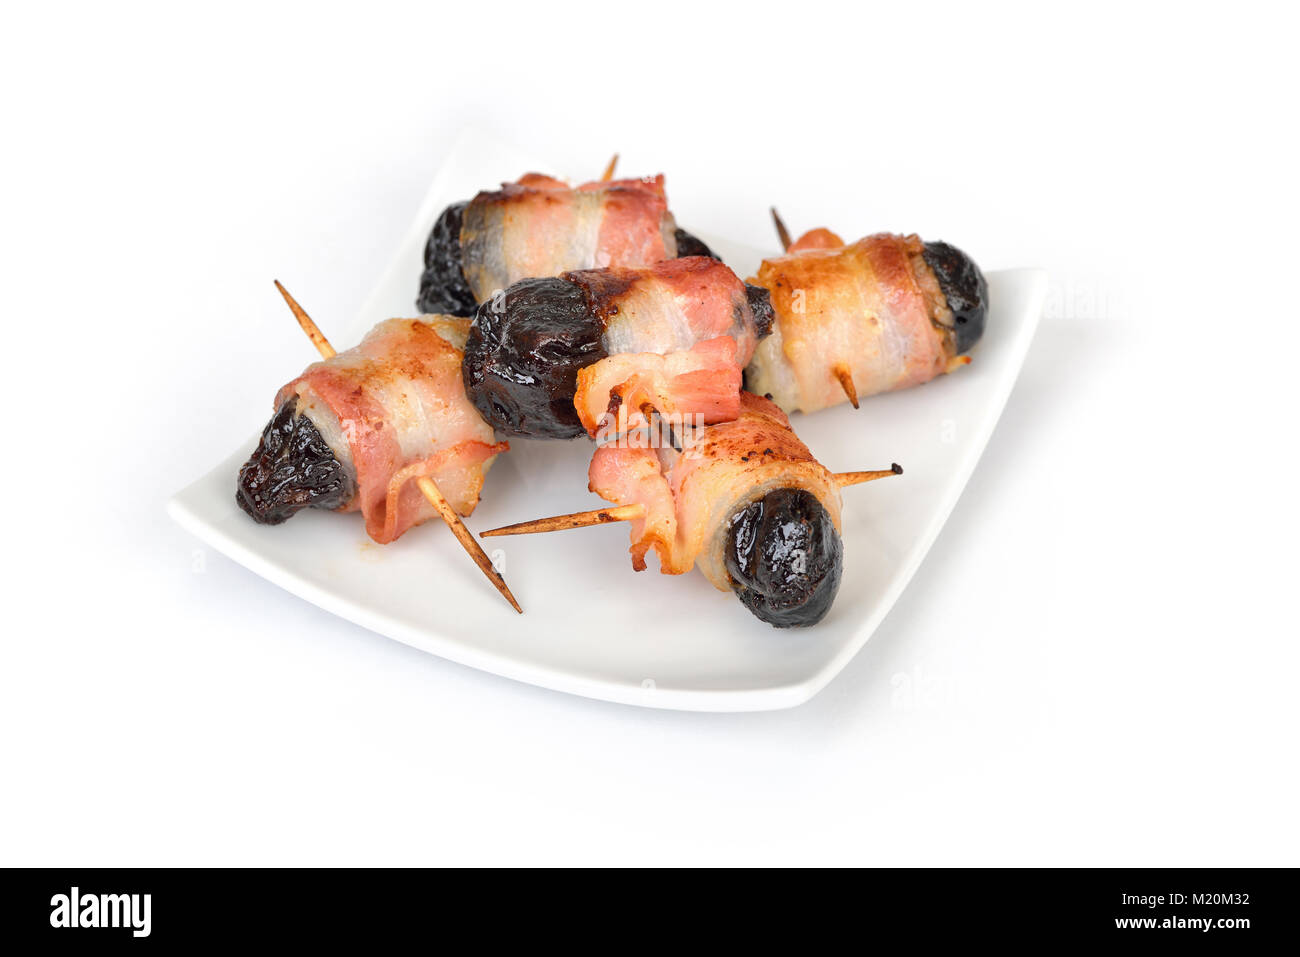 Delicious Spanish tapas on white background:  Fried prunes wrapped in bacon Stock Photo